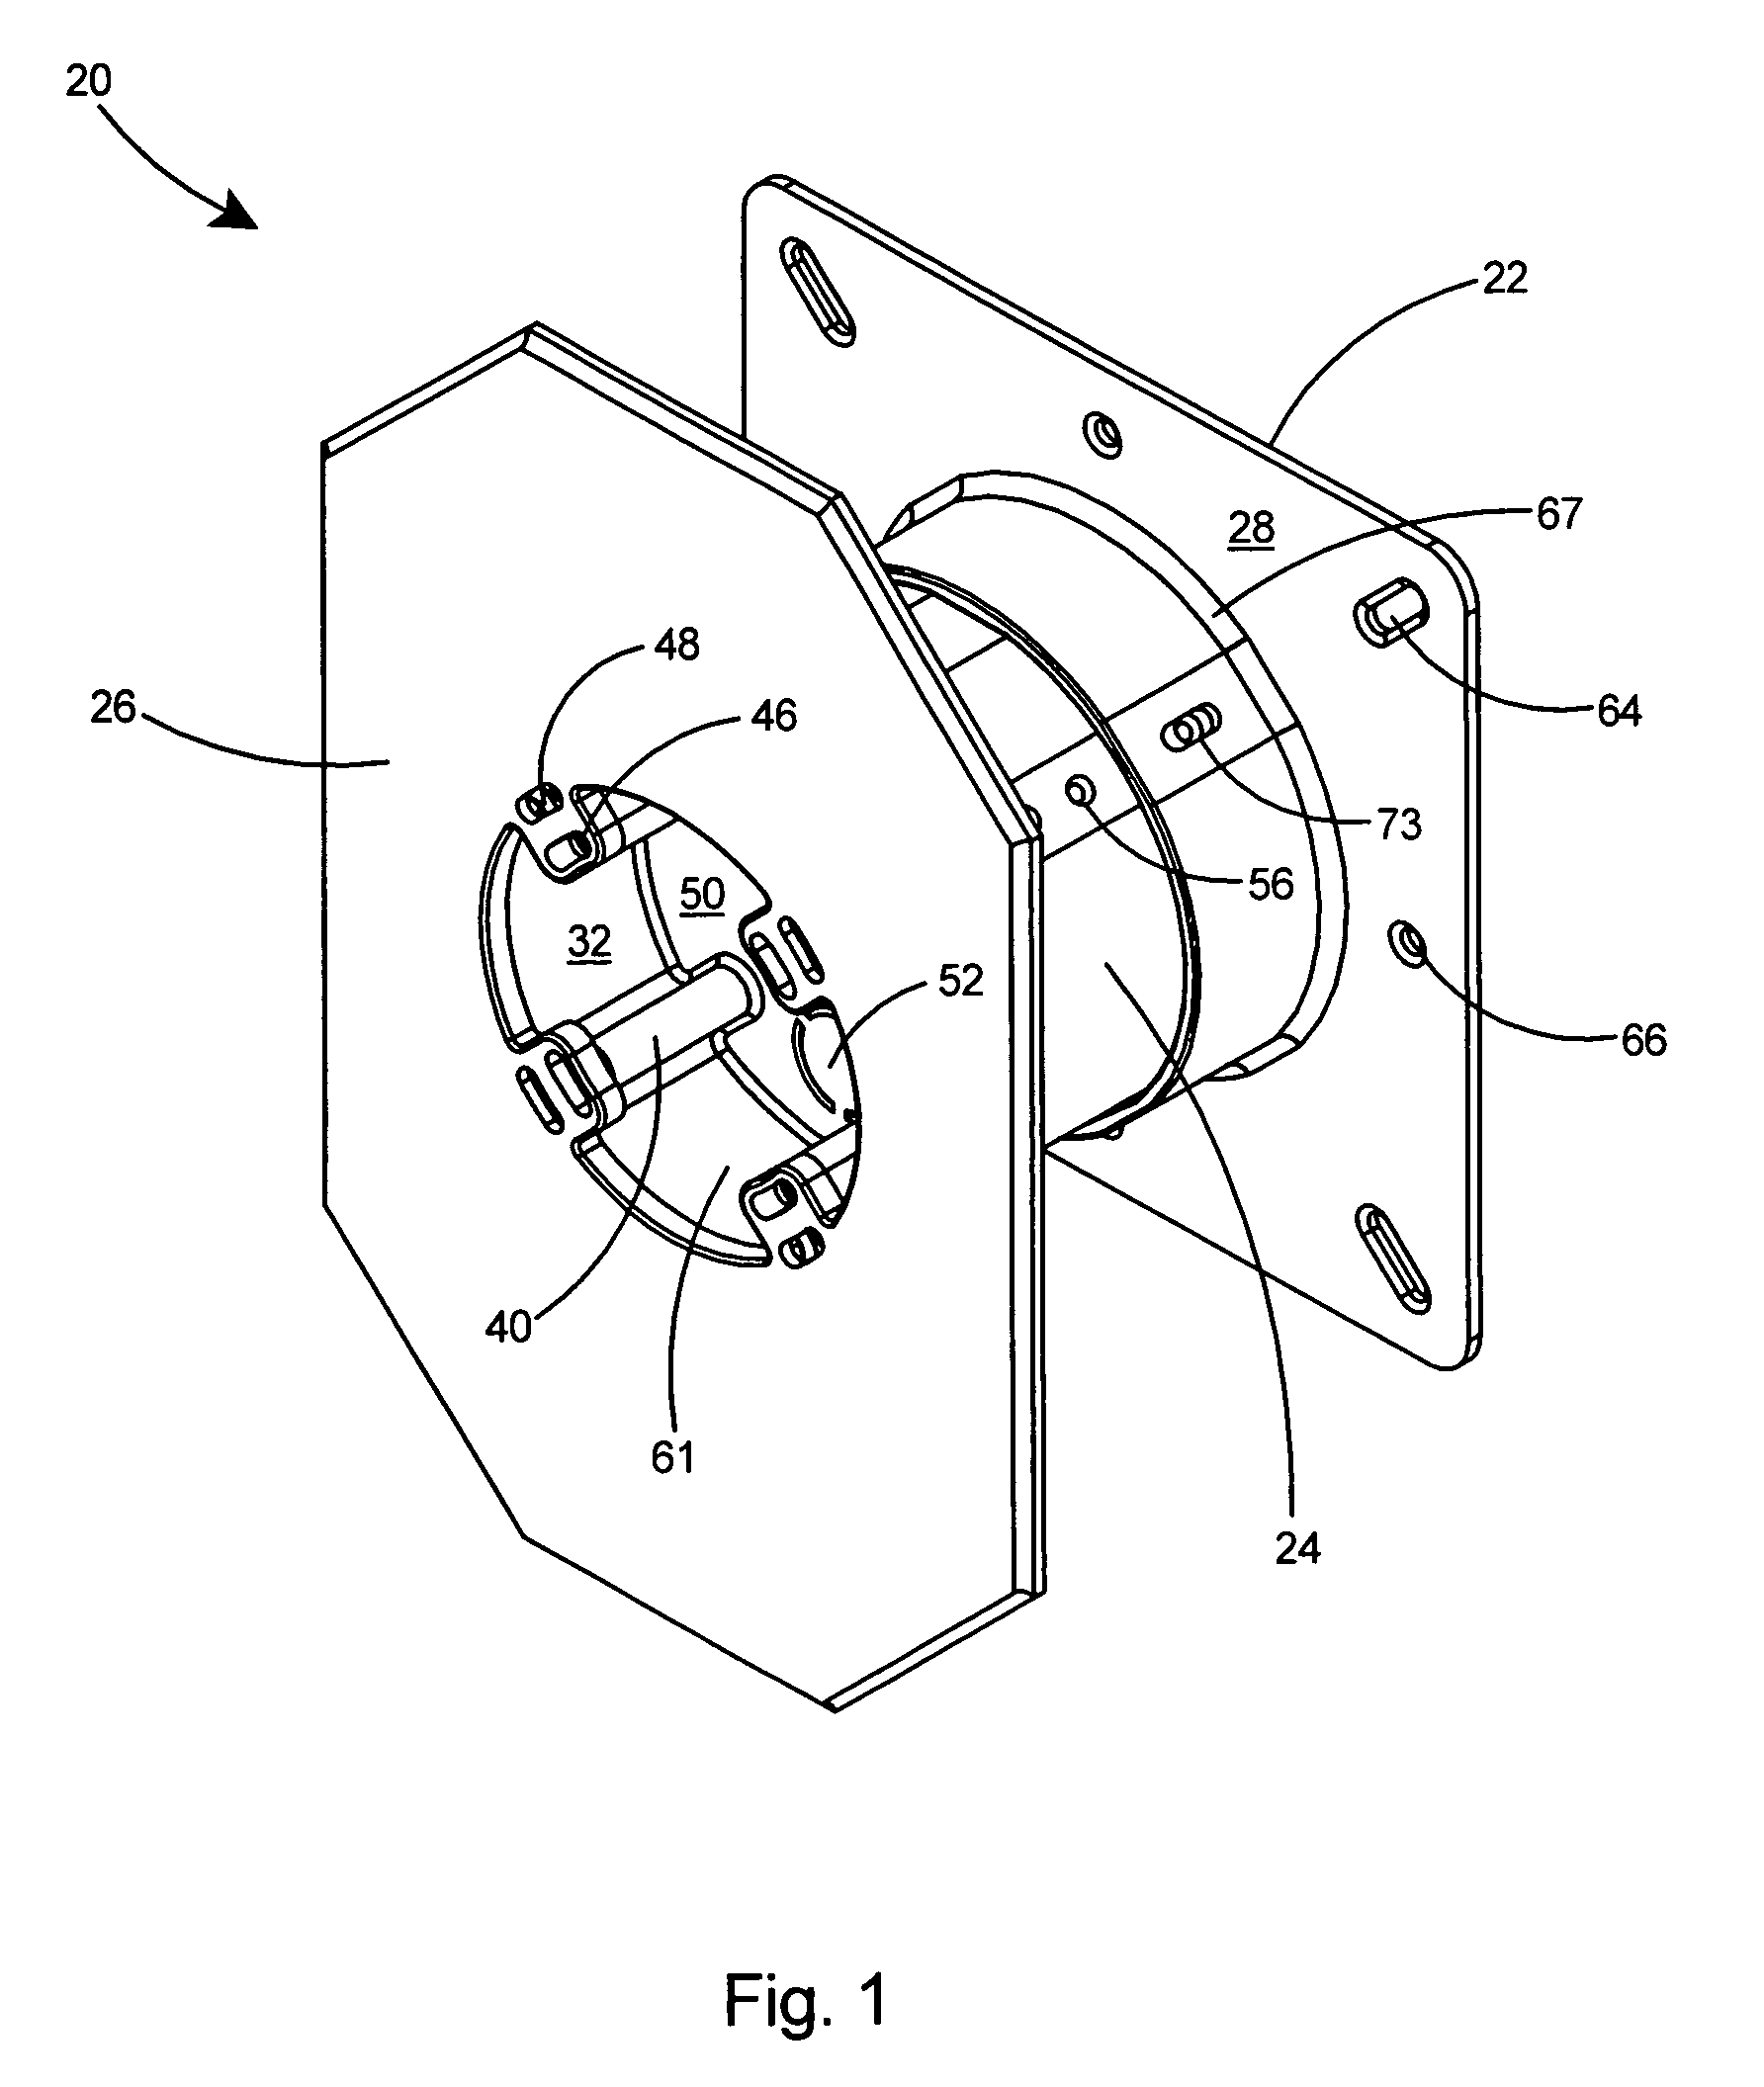 Adjustable electrical box and flange member for installation on a brick or stone wall